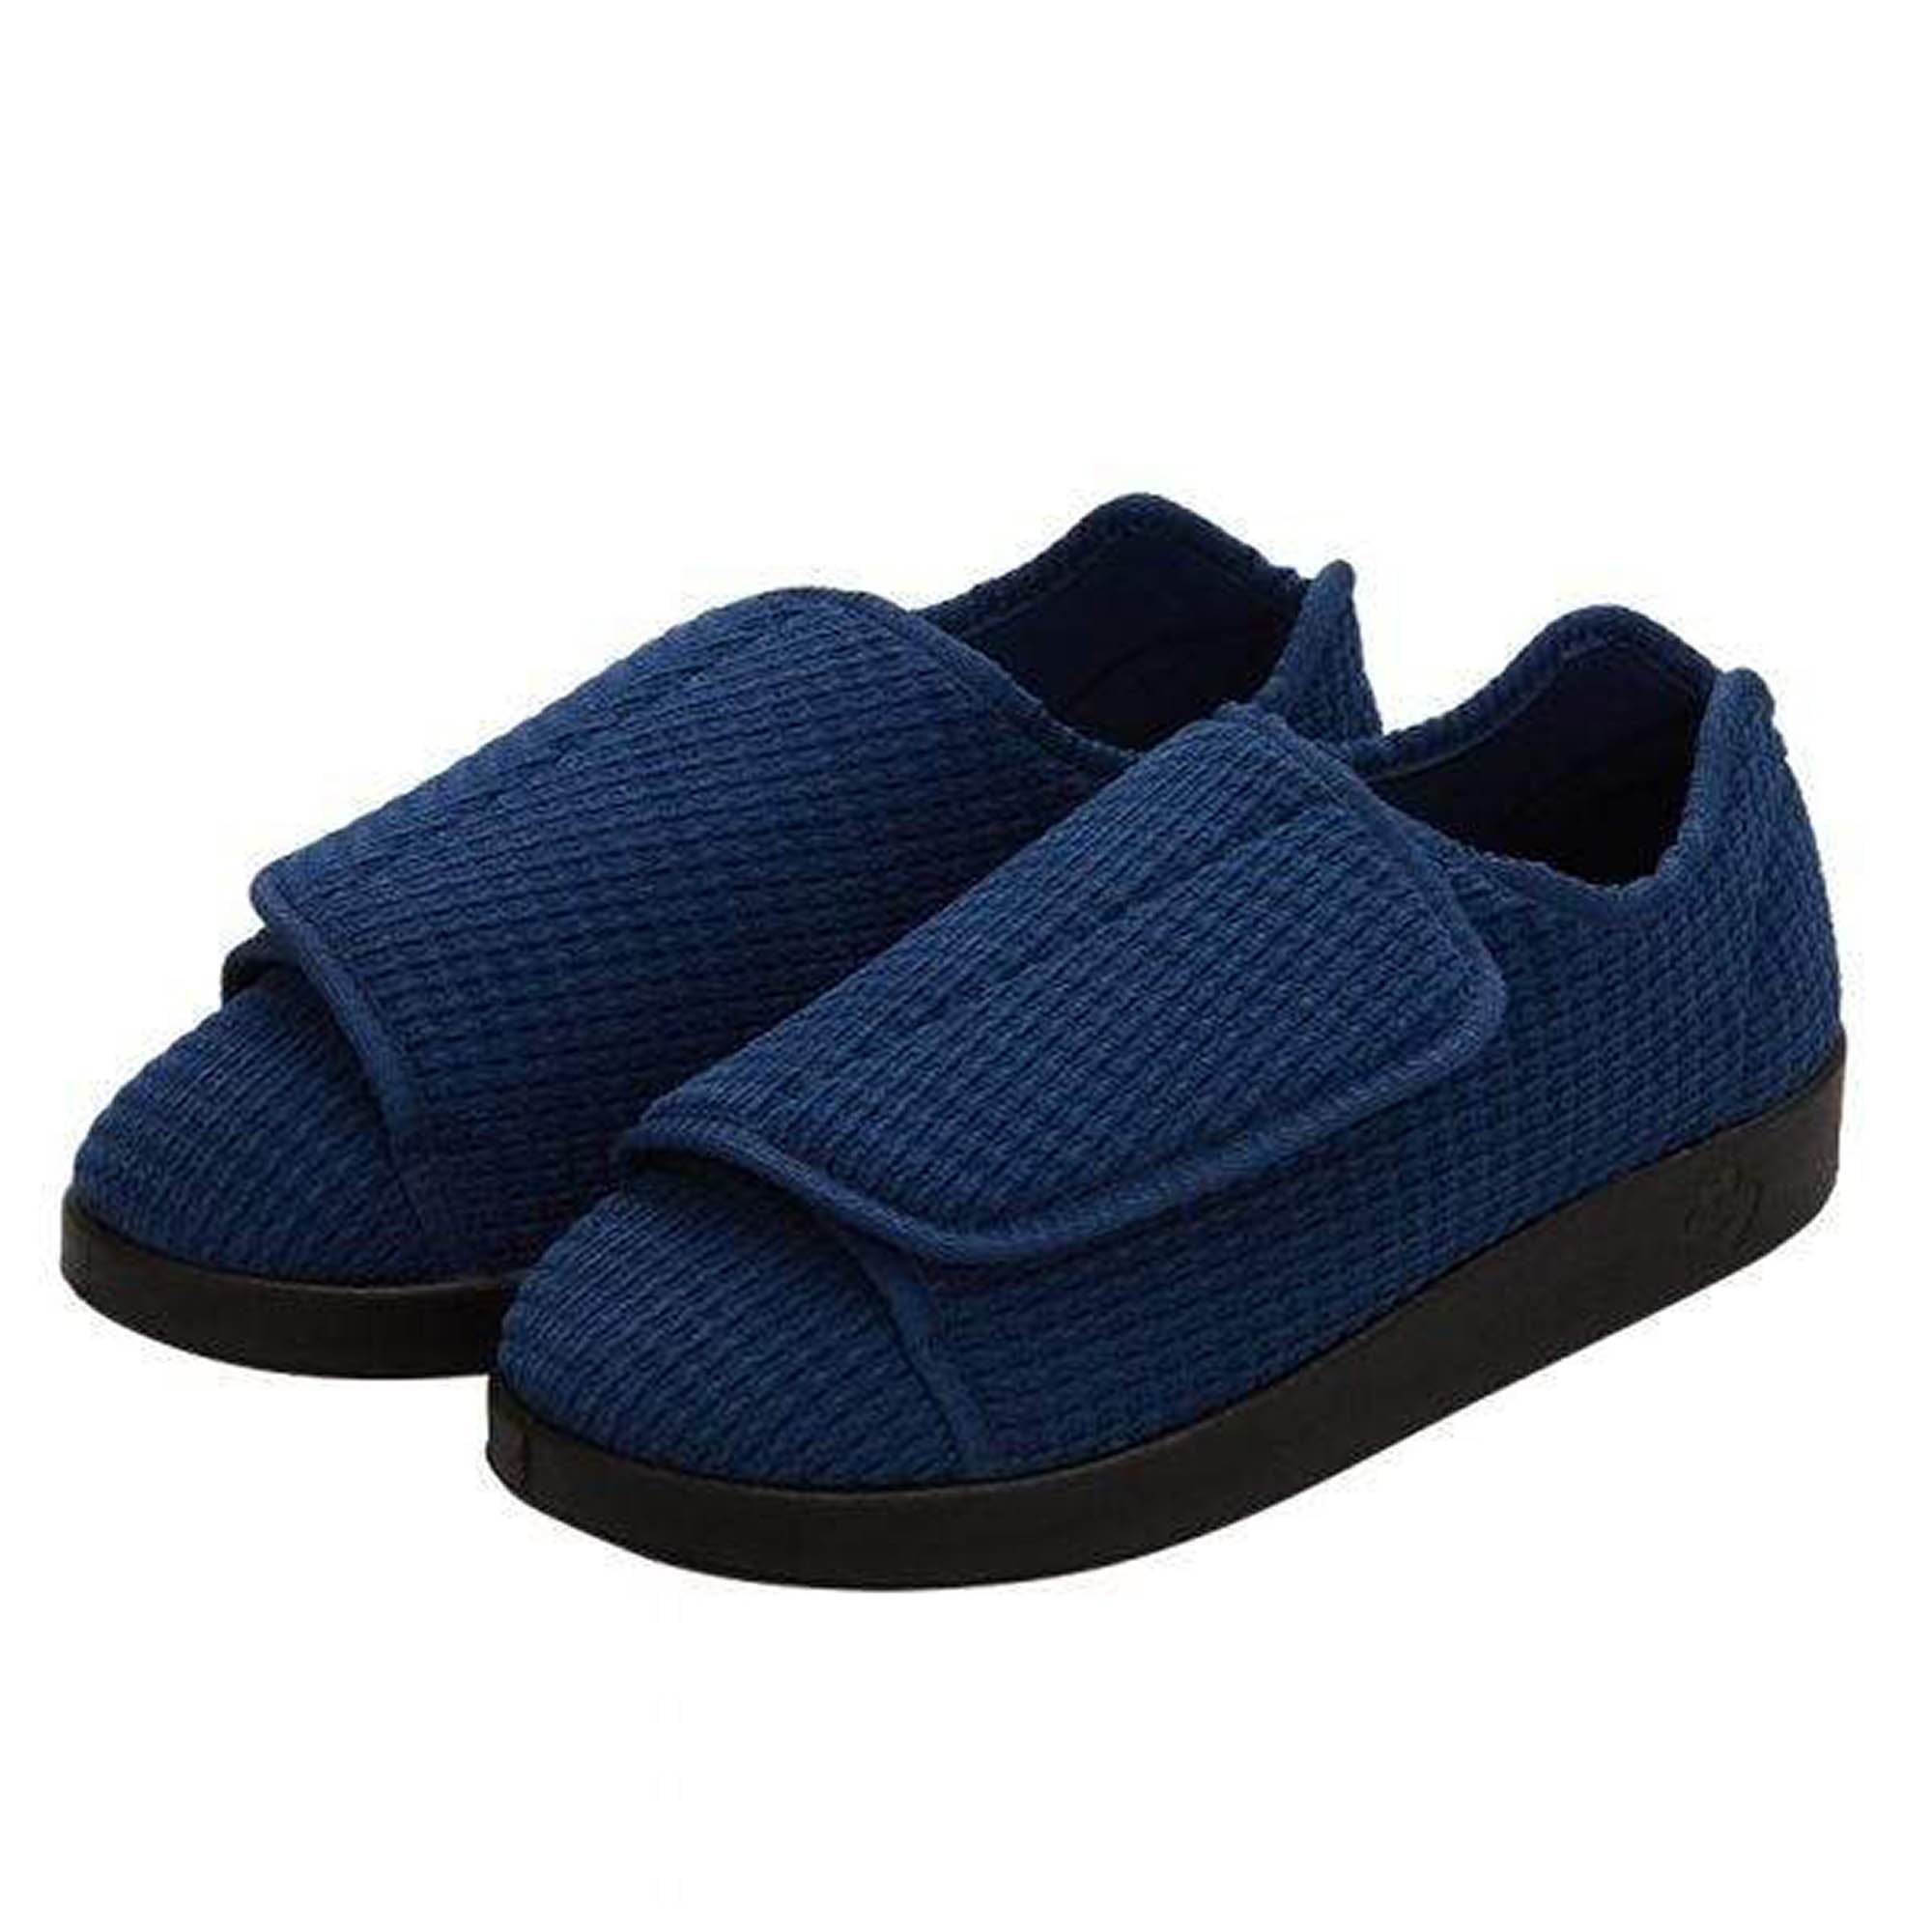 Silverts Men's Extra Extra Wide Slip-Resistant Slippers - Navy - 13